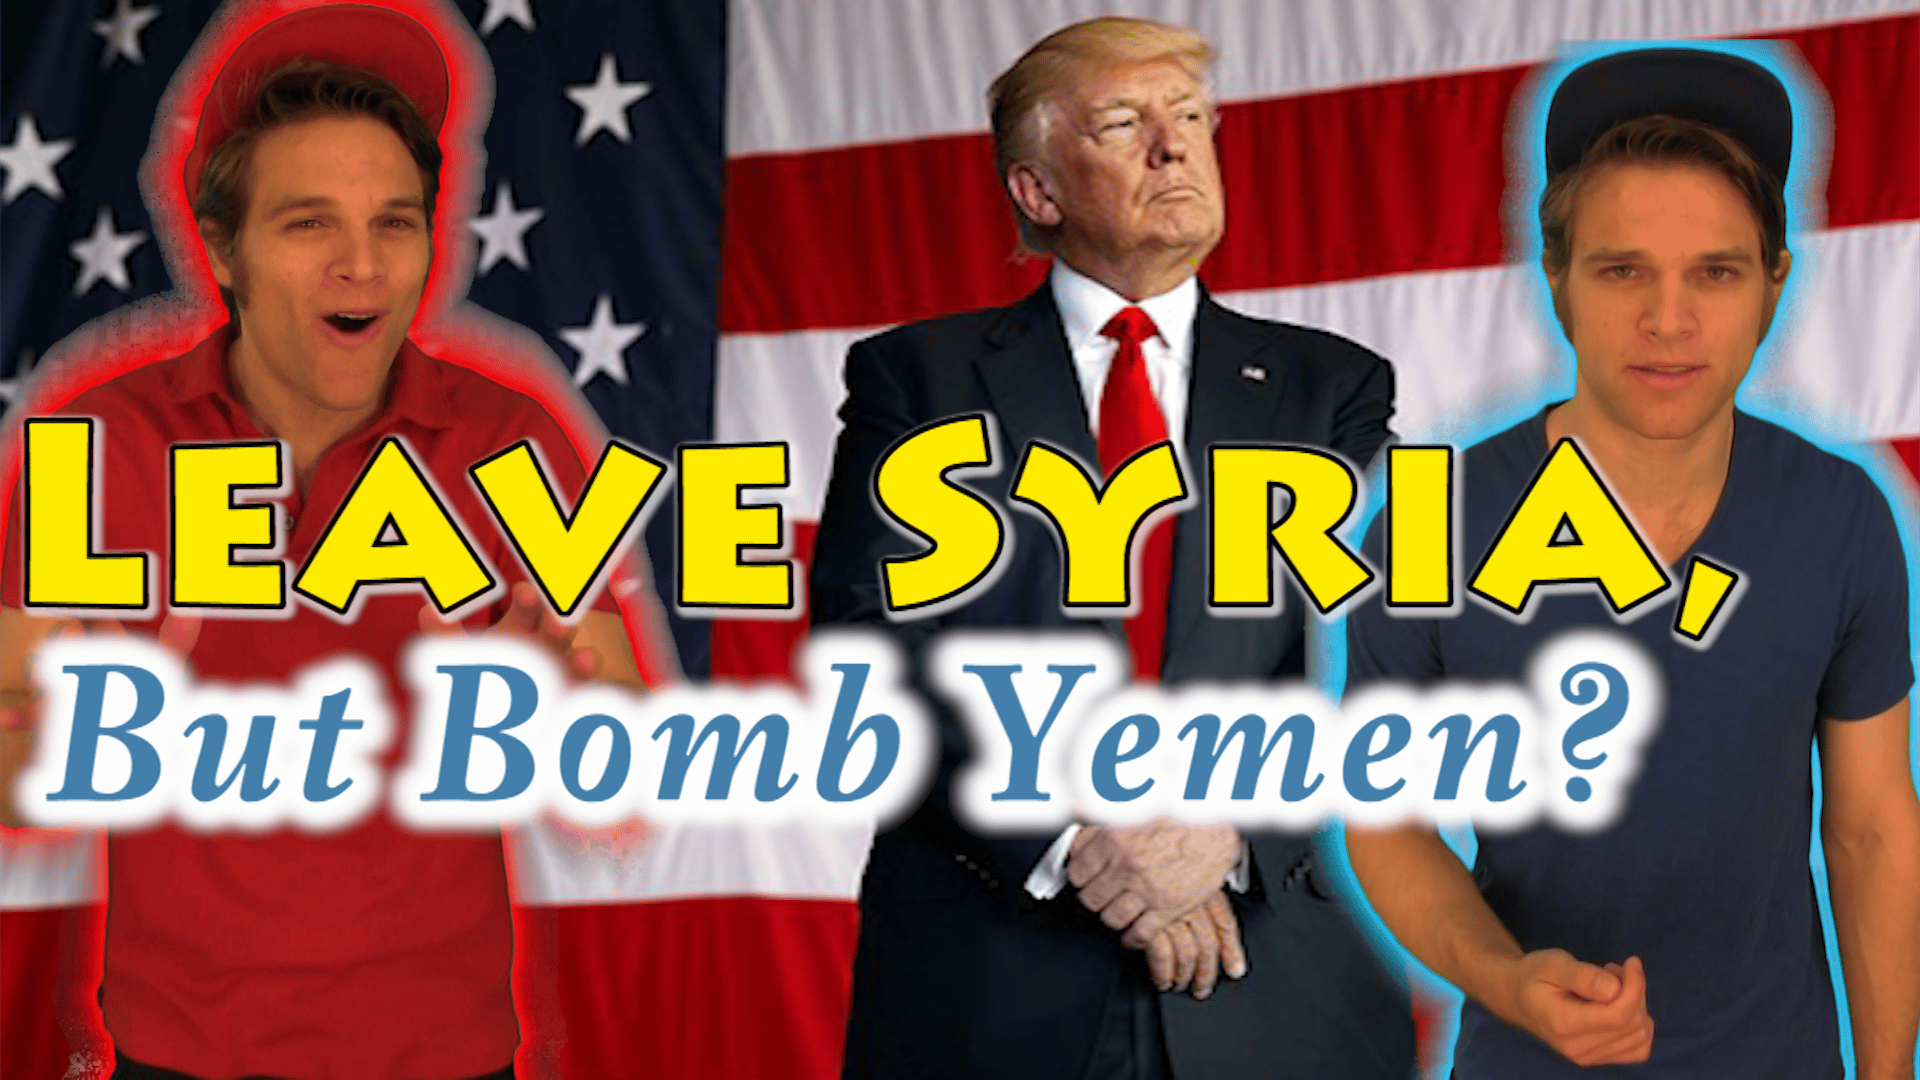 Donald Trump wants to Leave Syria but Bomb Yemen?